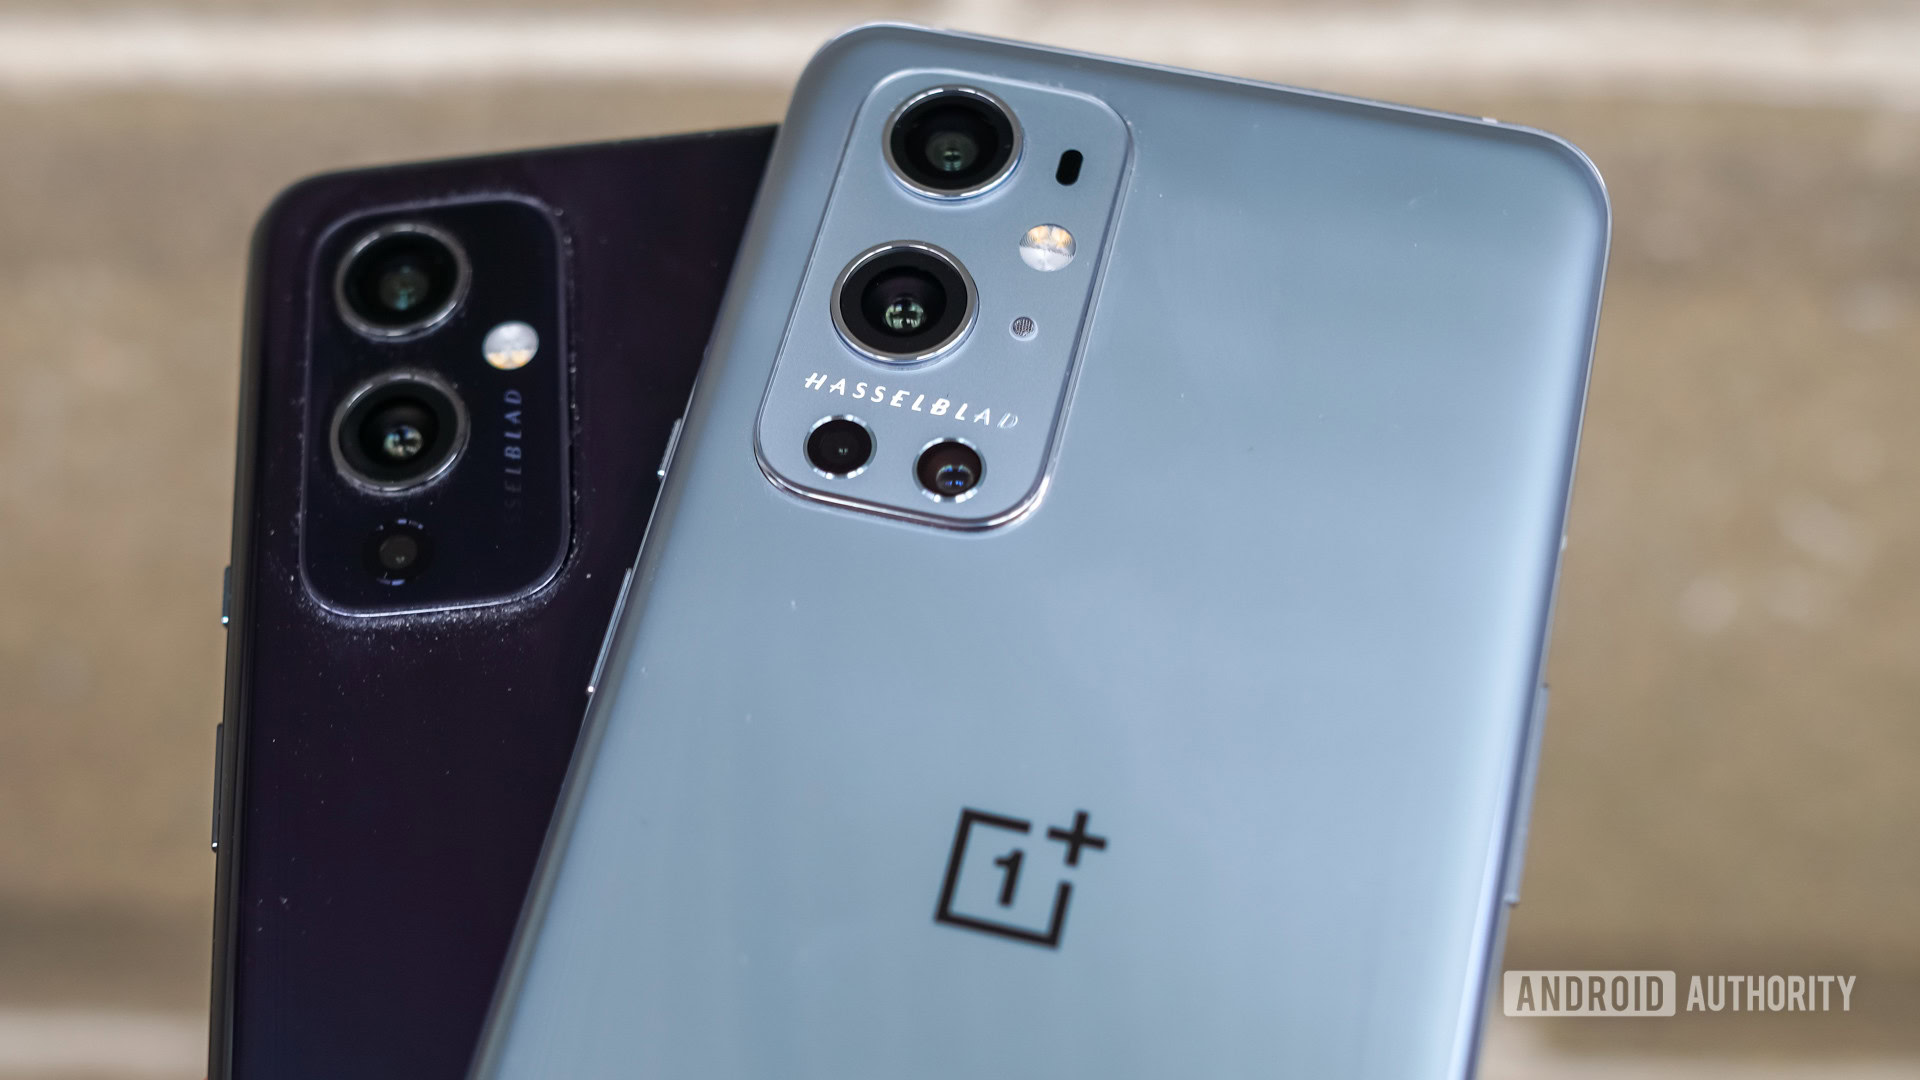 OnePlus 9 Pro phone with nfc